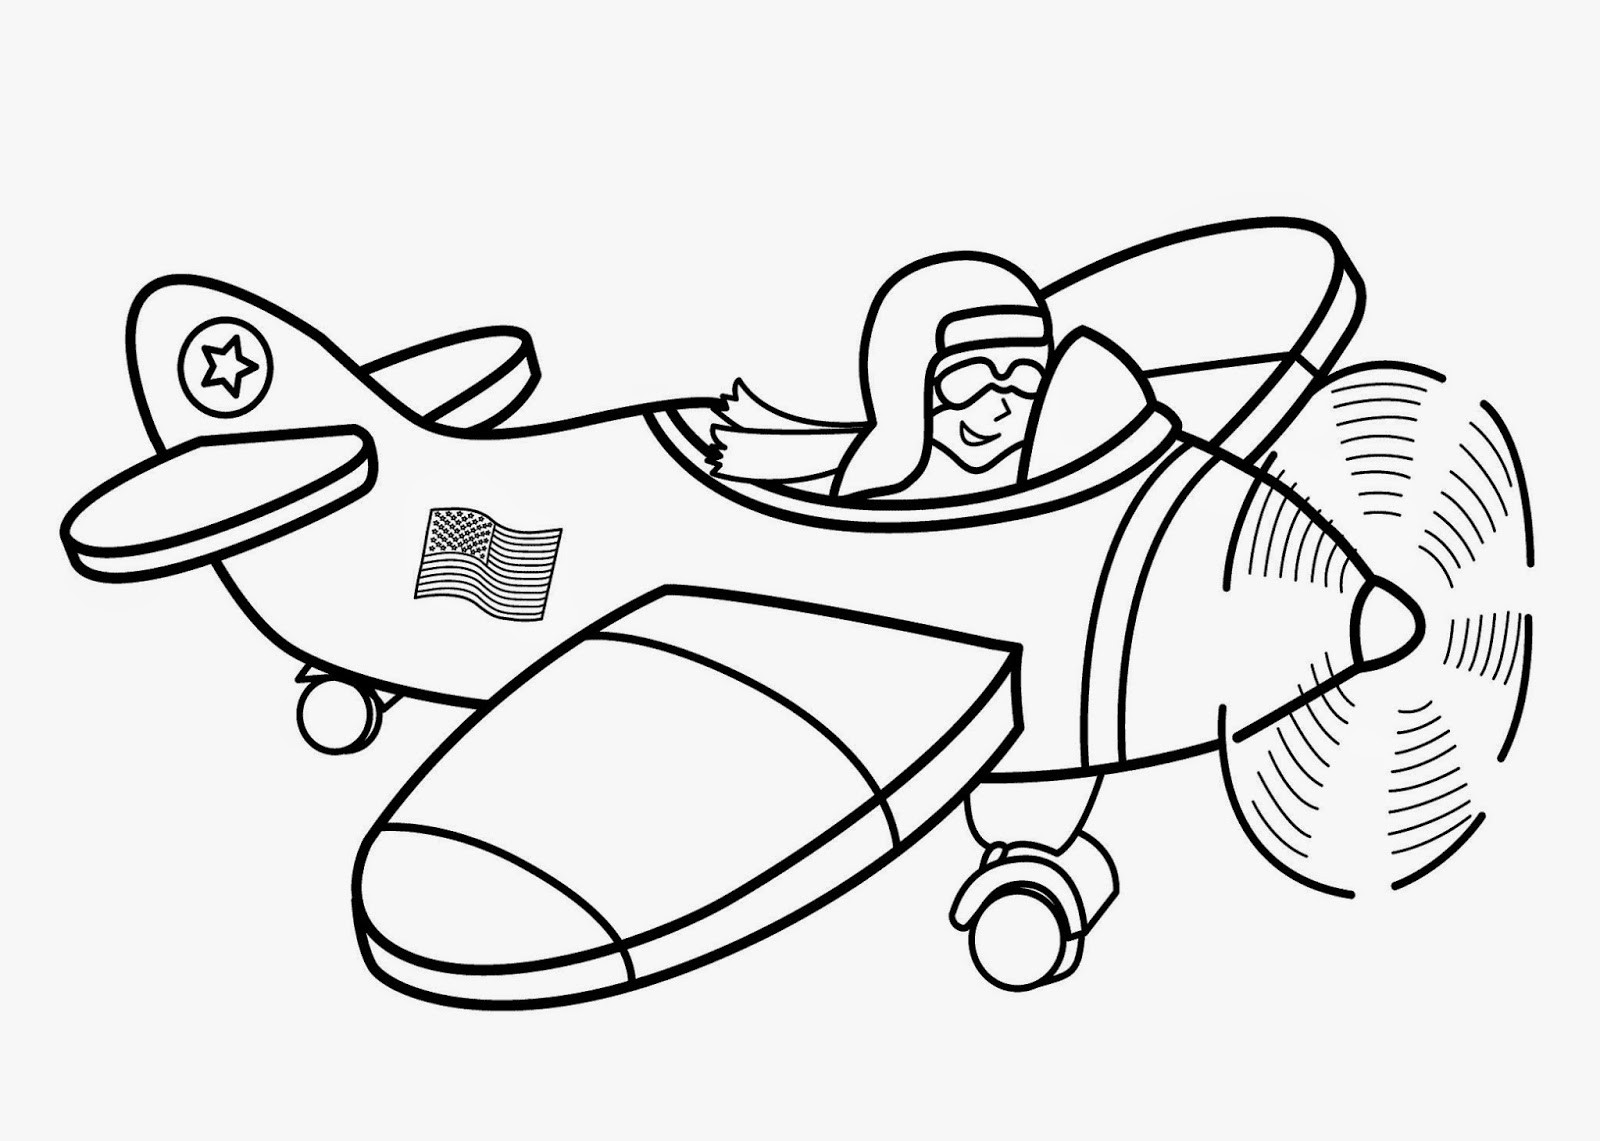 Download Cool Airplane Coloring Page Free Printable Coloring Pages For Kids